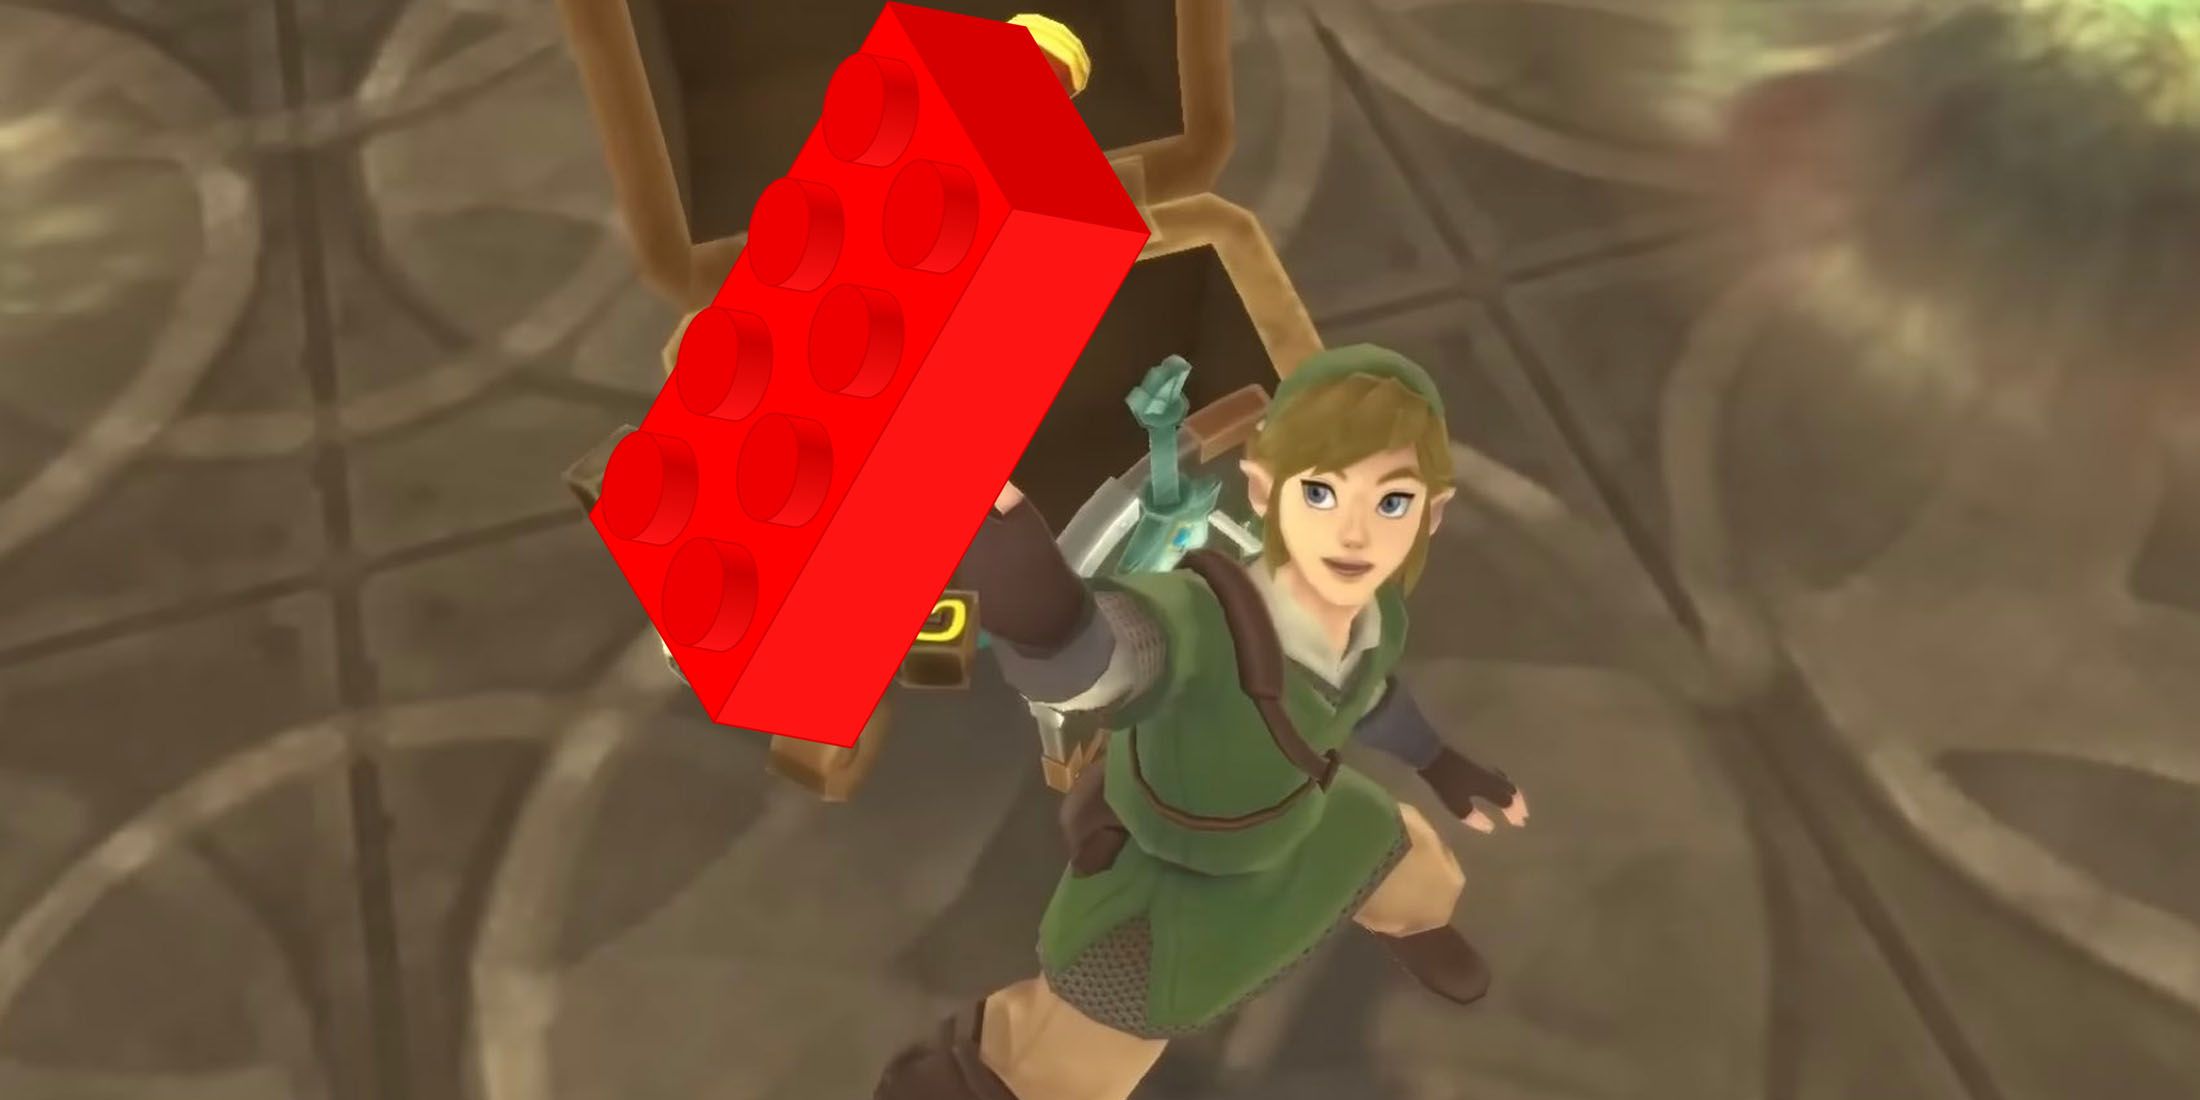 A screenshot of Link from The Legend of Zelda holding a red 2X4 Lego brick.